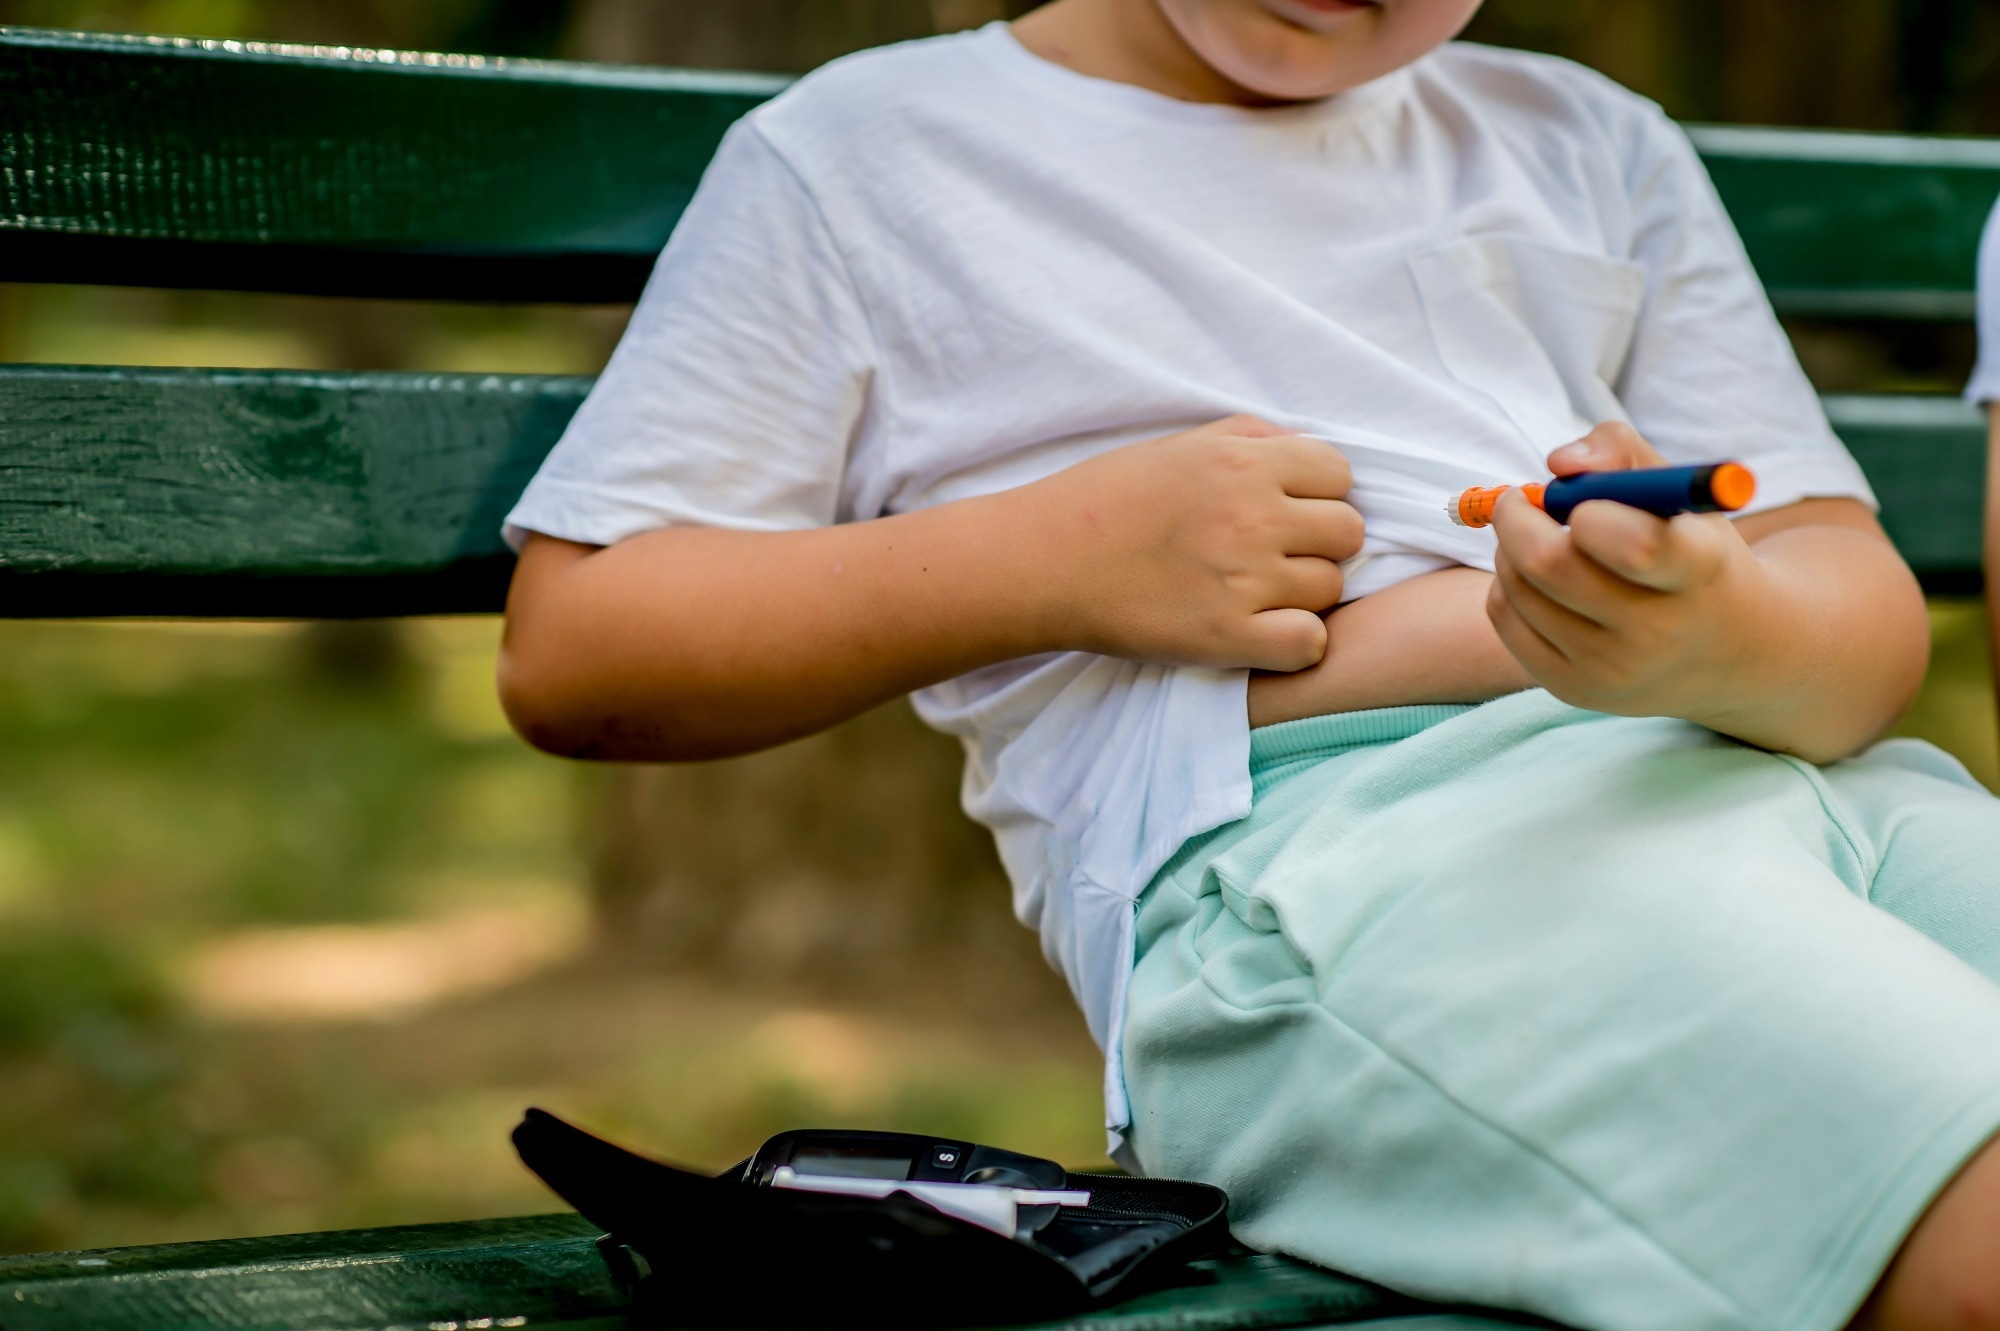 A gloomy outlook for type 1 diabetes in children and adolescents by 2050